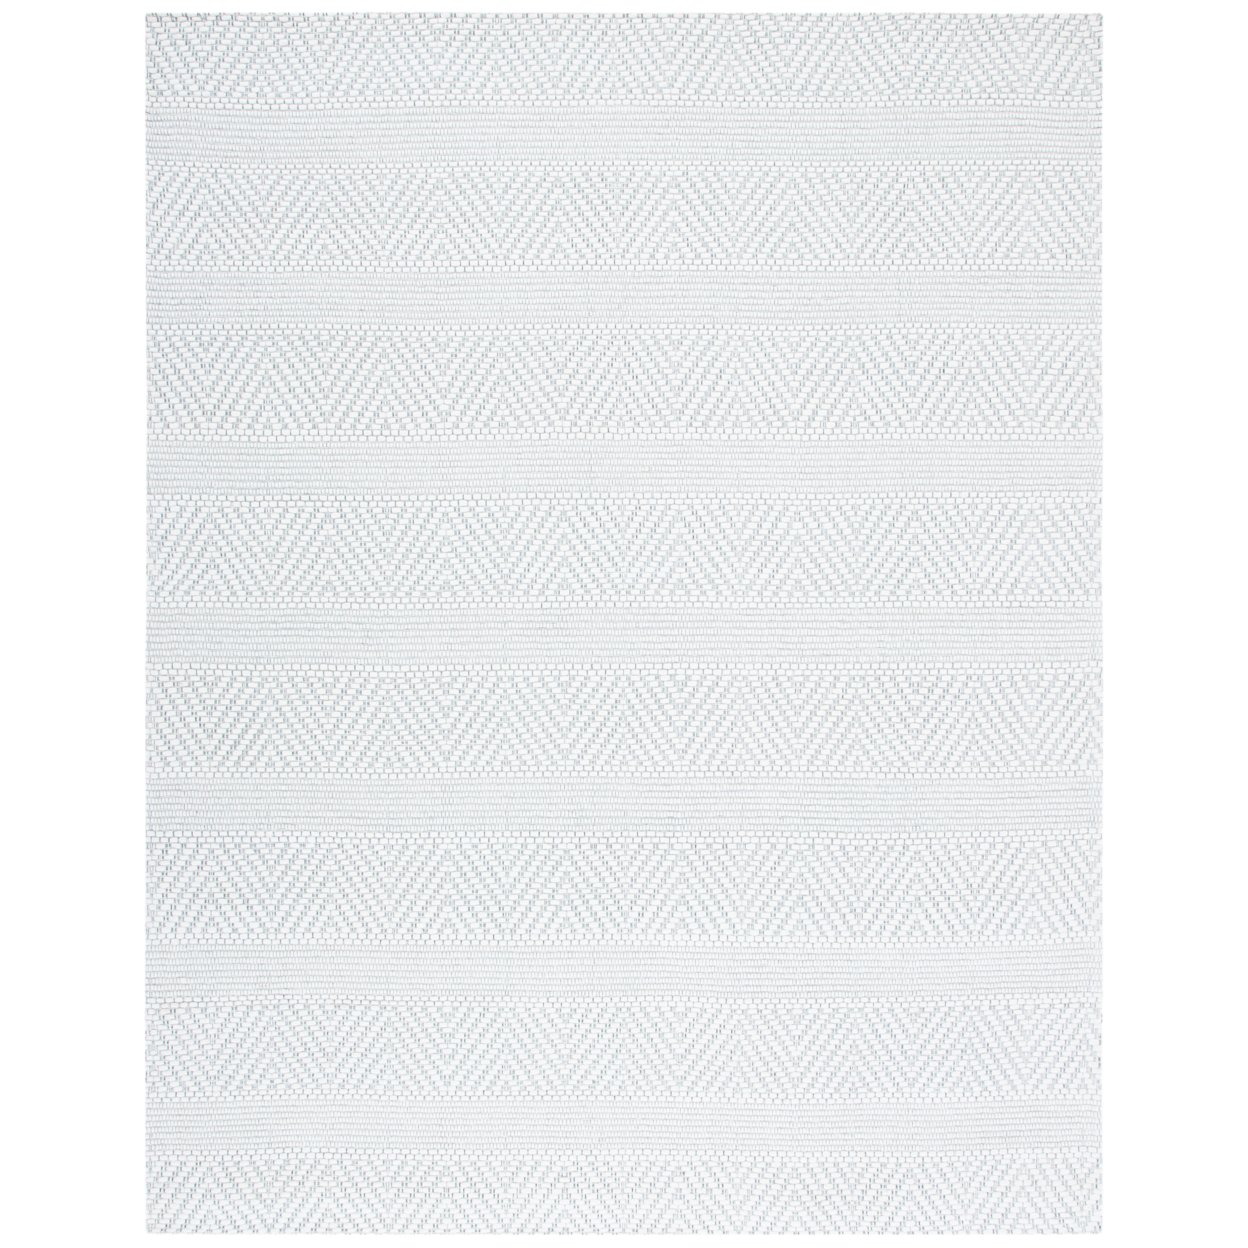 SAFAVIEH Marbella Collection MRB554A Ivory Rug - 8' X 10'